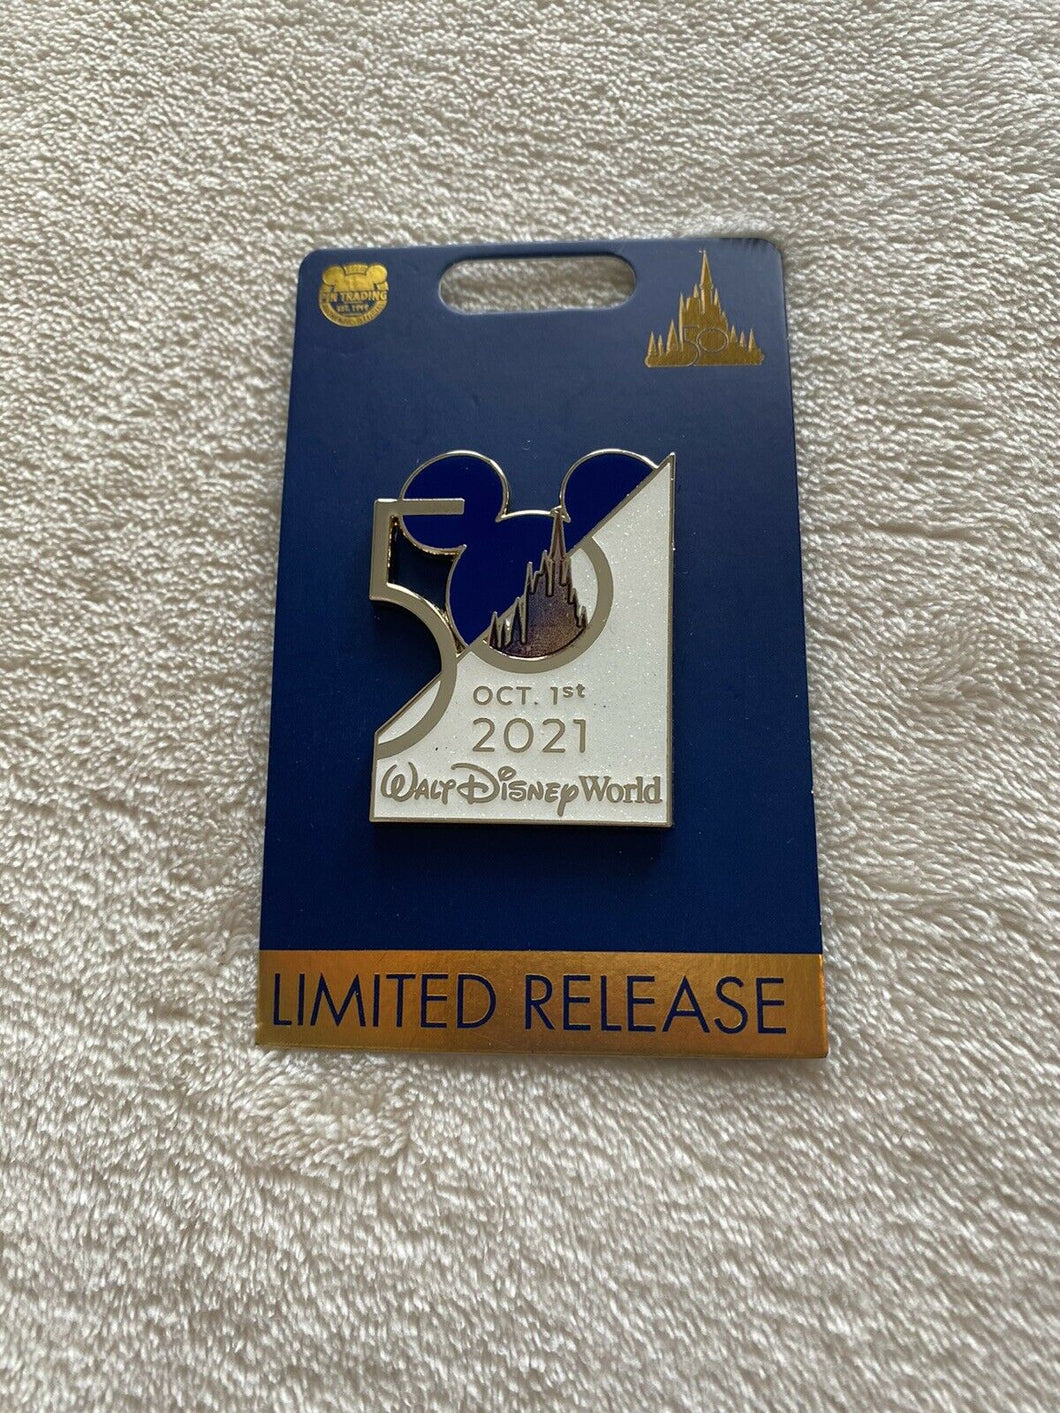 Disney World 50th Anniversary Pin - Oct. 1 2021 - Limited Release